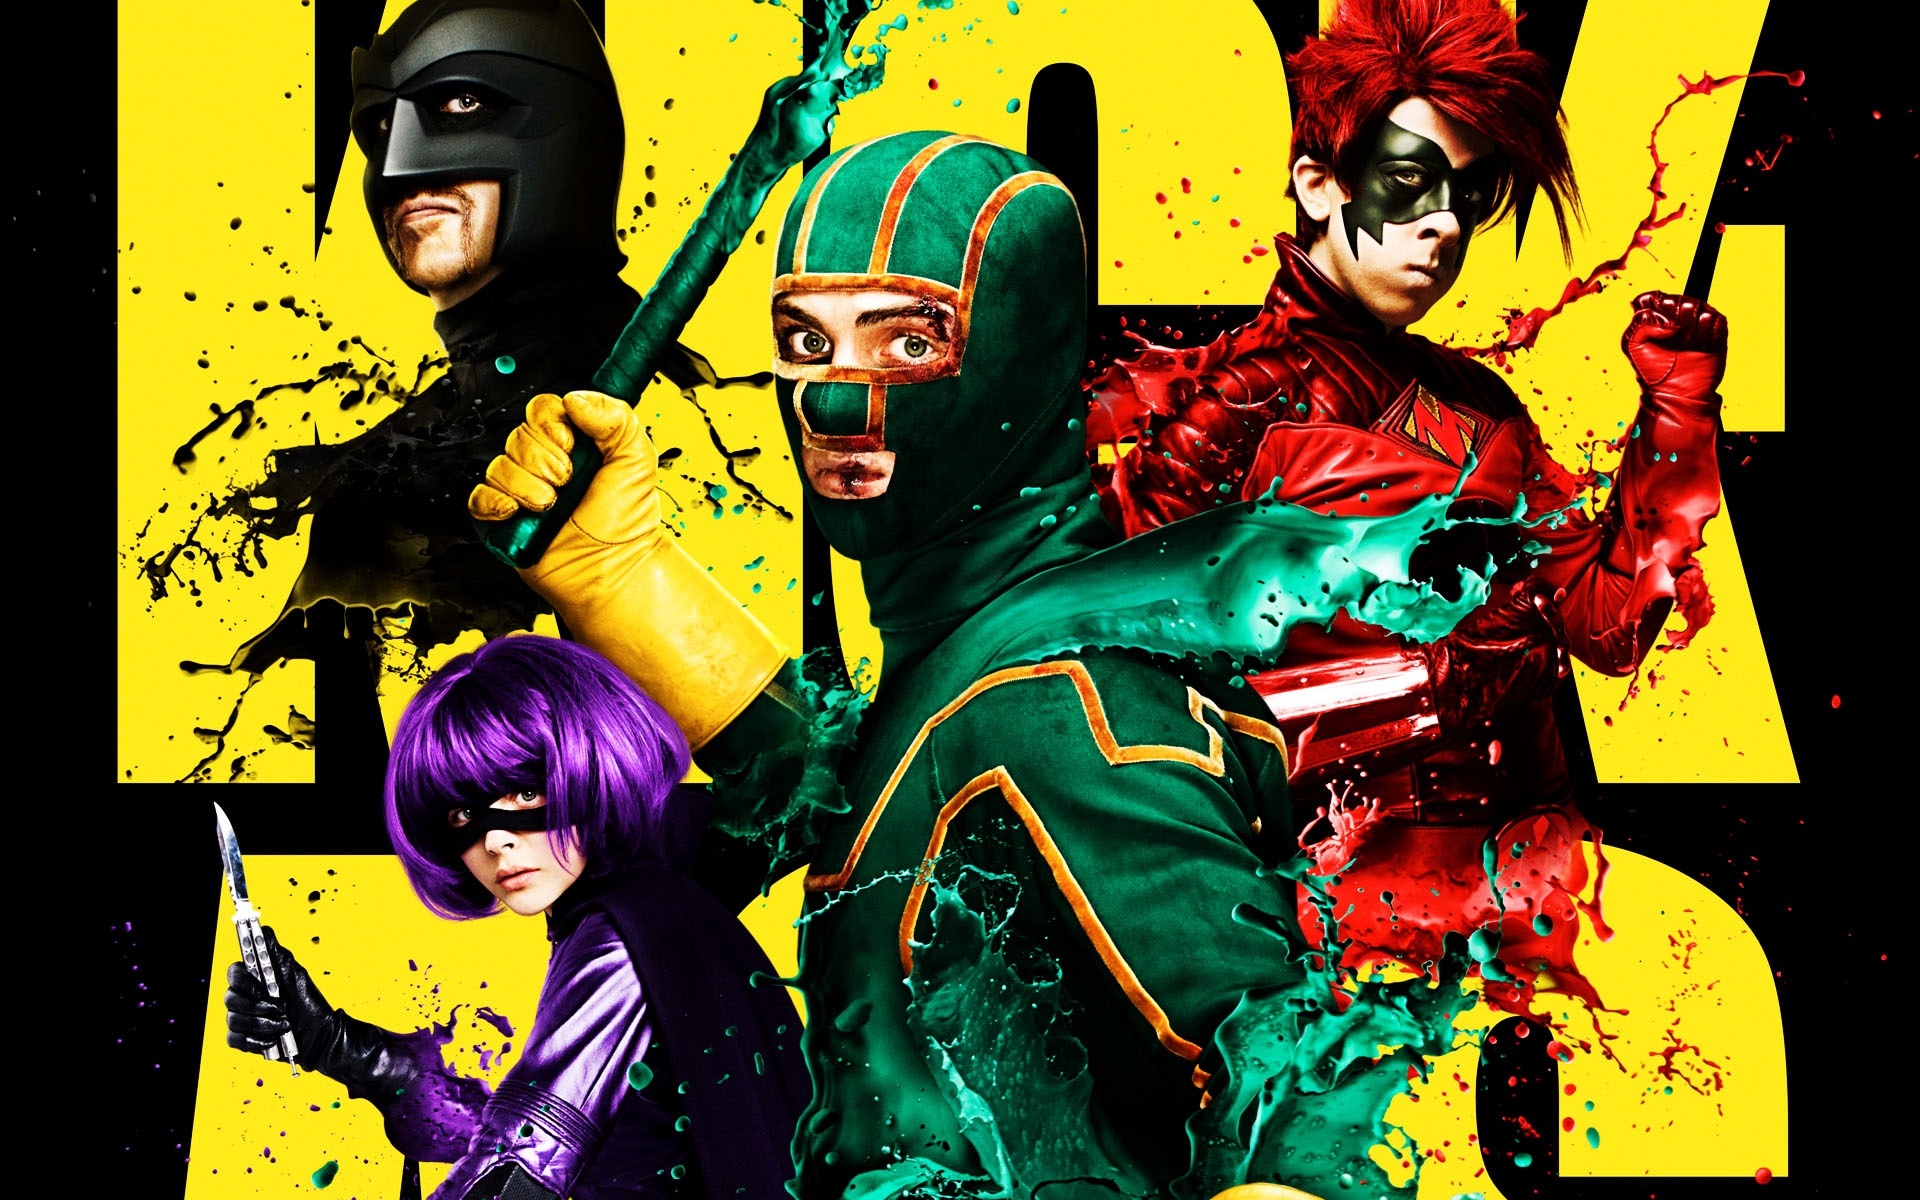 Kick-Ass: Based on the comic book of the same name by Mark Millar and John Romita, Jr. 1920x1200 HD Background.